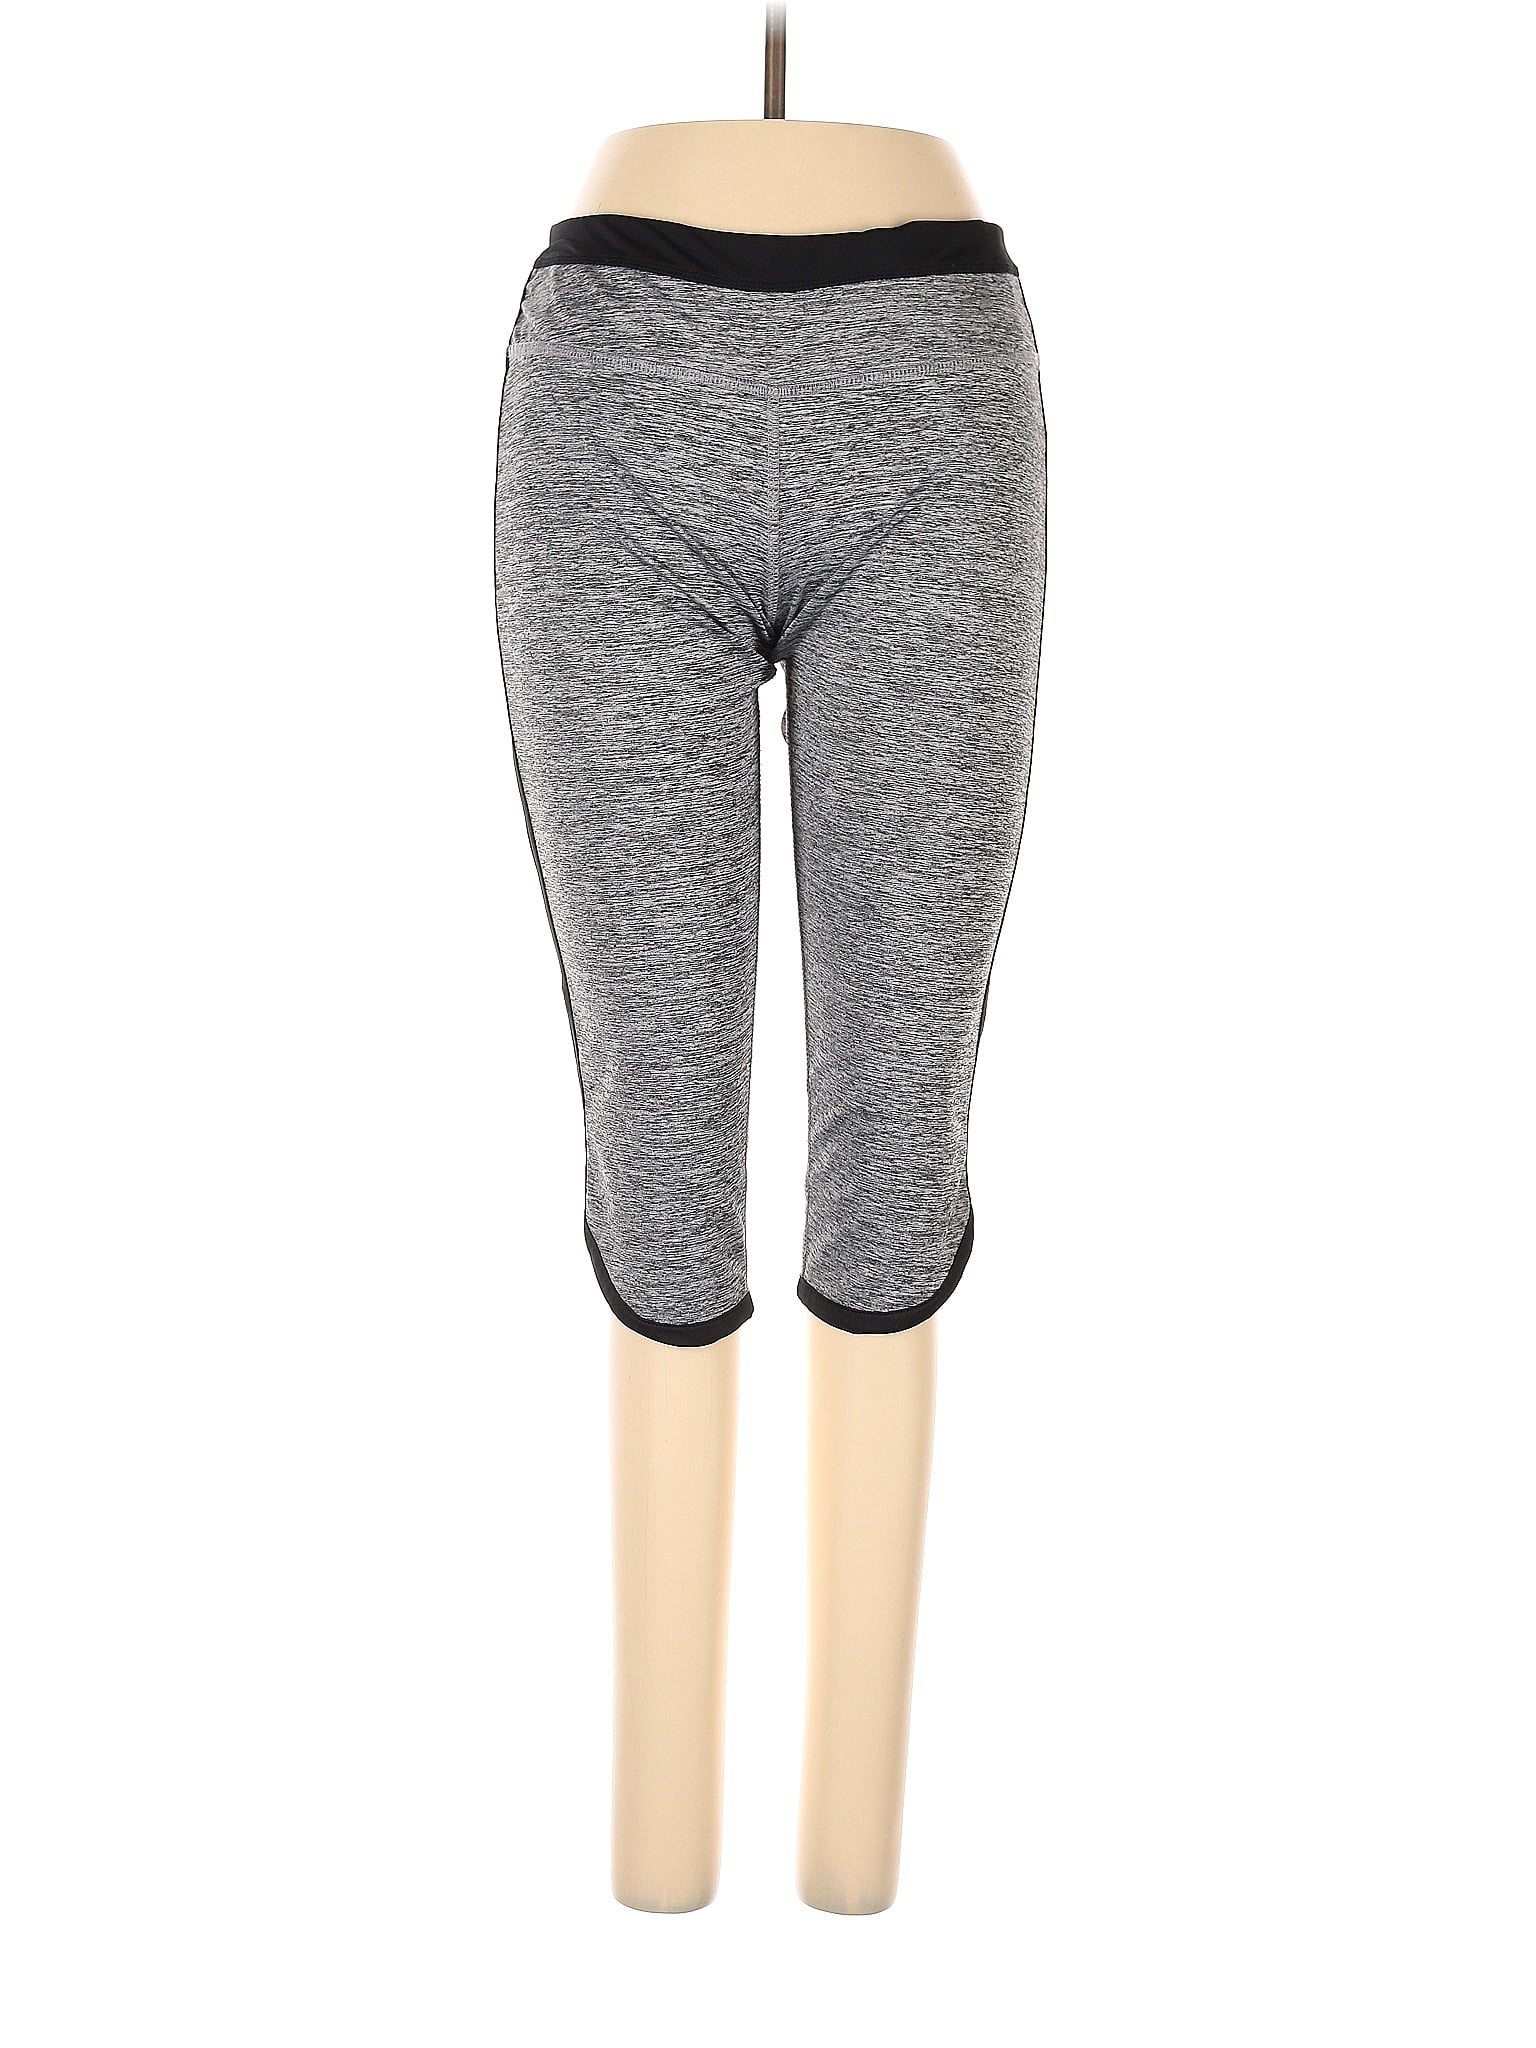 GAIAM Marled Gray Active Pants Size XL - 60% off